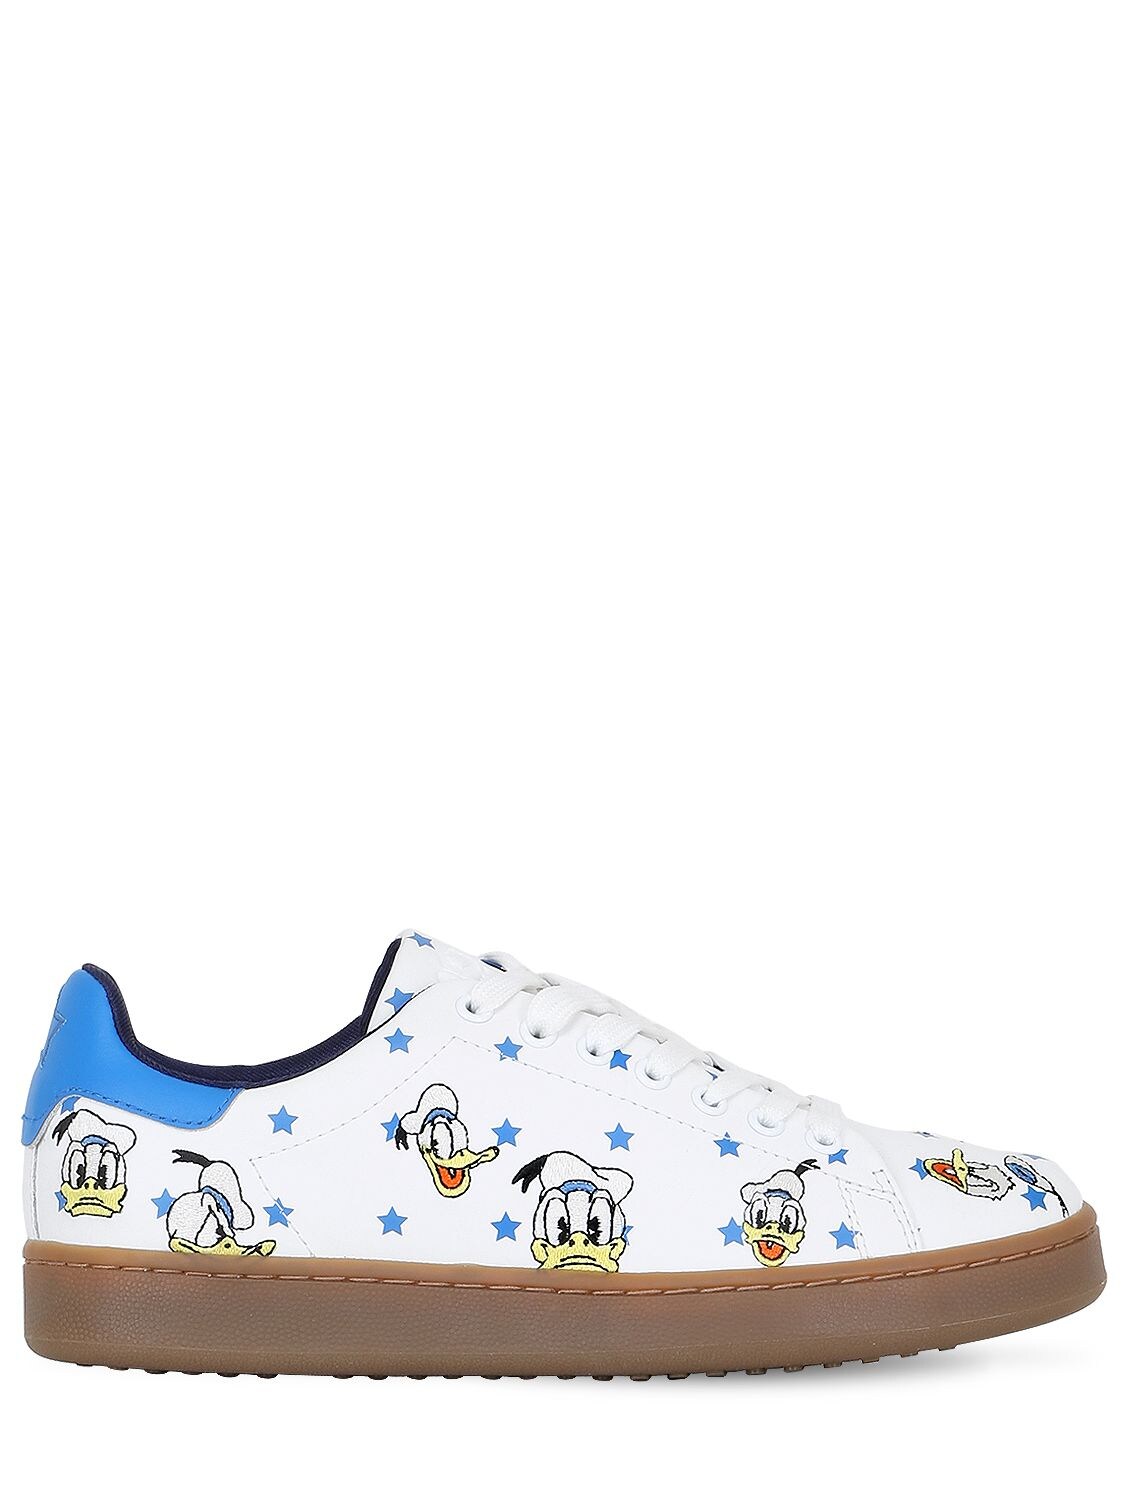 DONALD DUCK EMBROIDERED LEATHER SNEAKERS